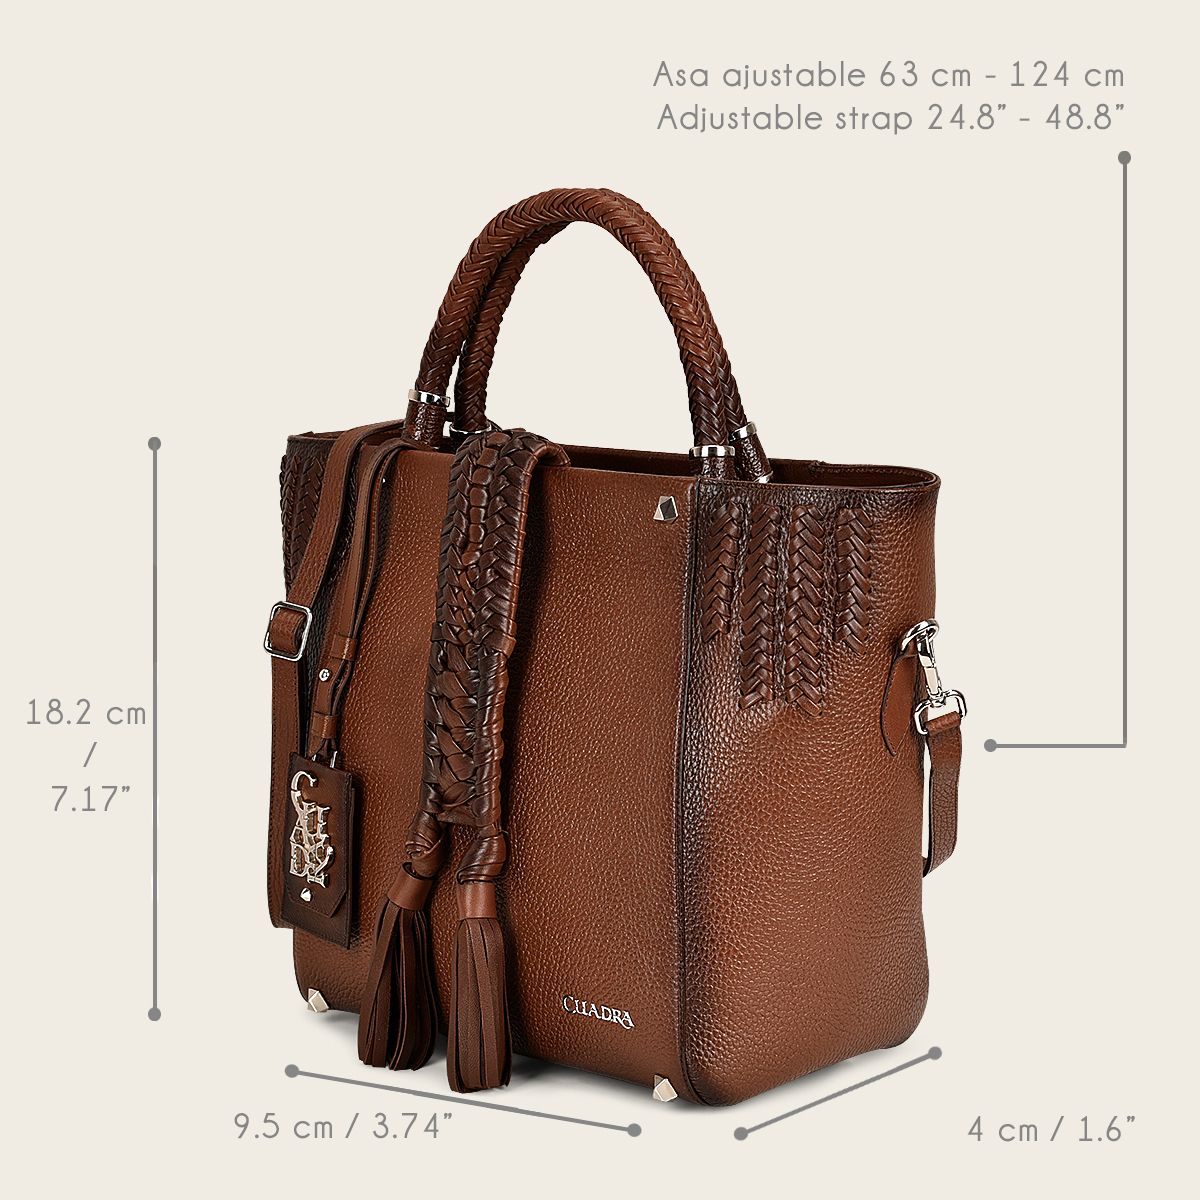 Brown leather tote bag with handmade fabric application